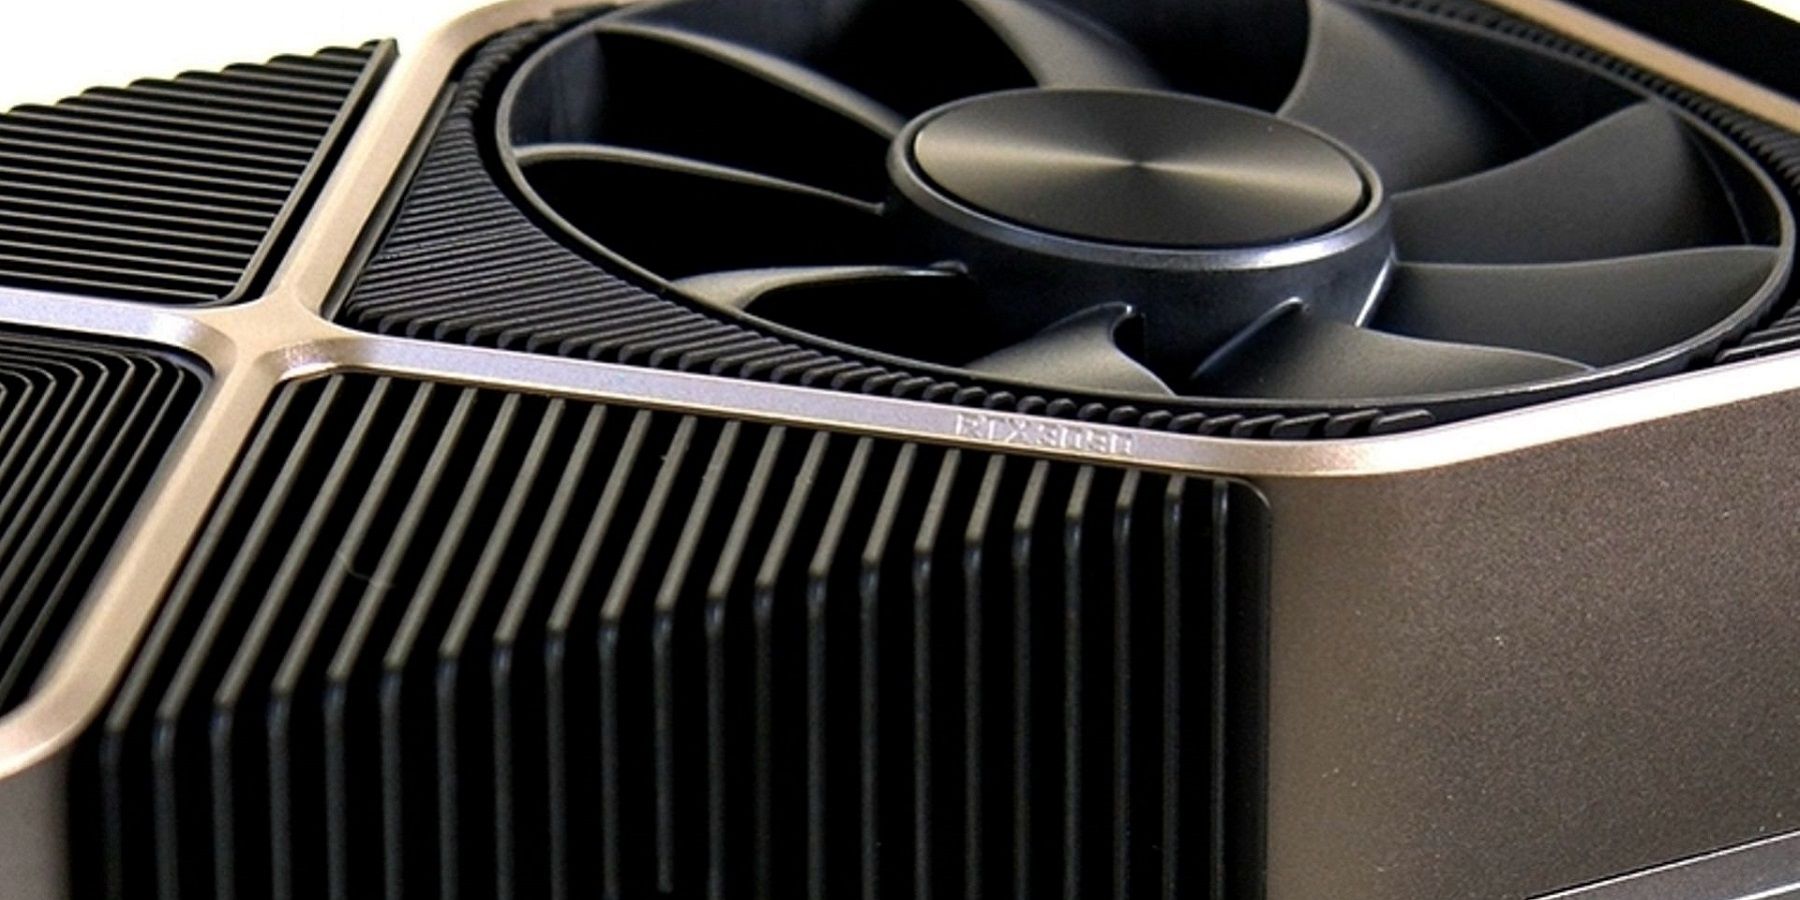 A close up photo of an Nvidia RTX 3090 graphics card.